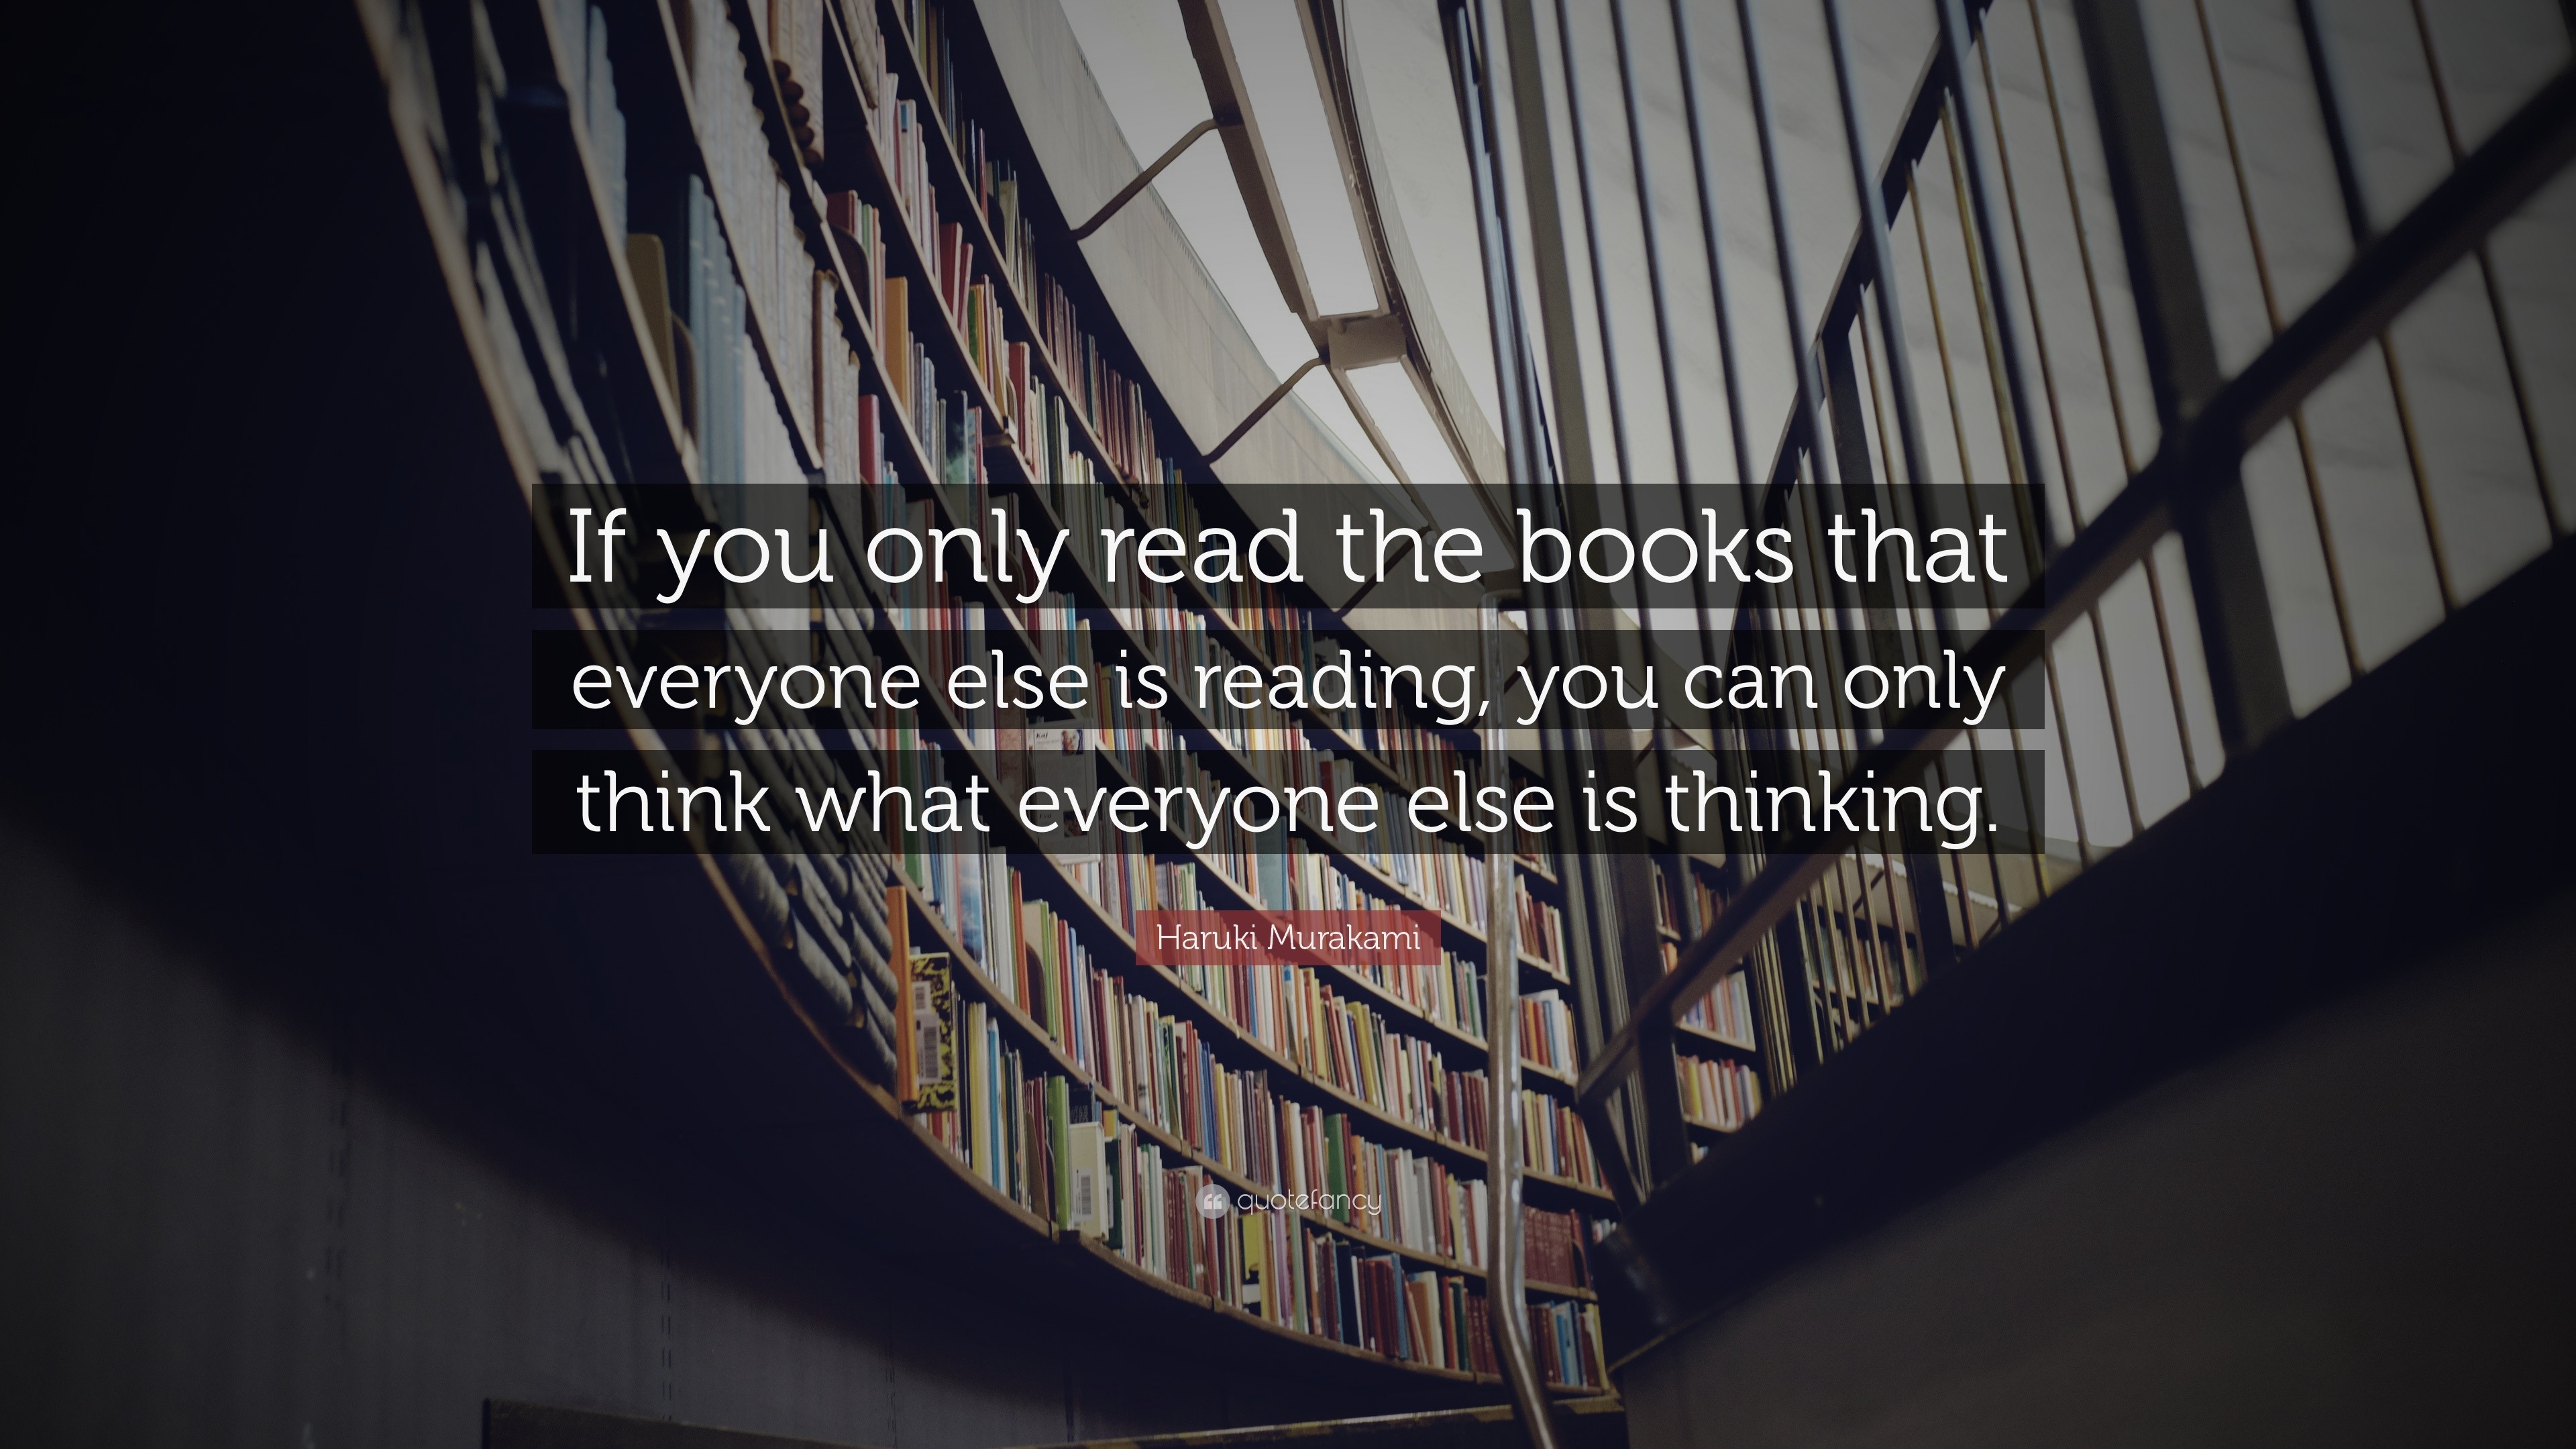 Quotes About Books And Reading (22 wallpapers) - Quotefancy